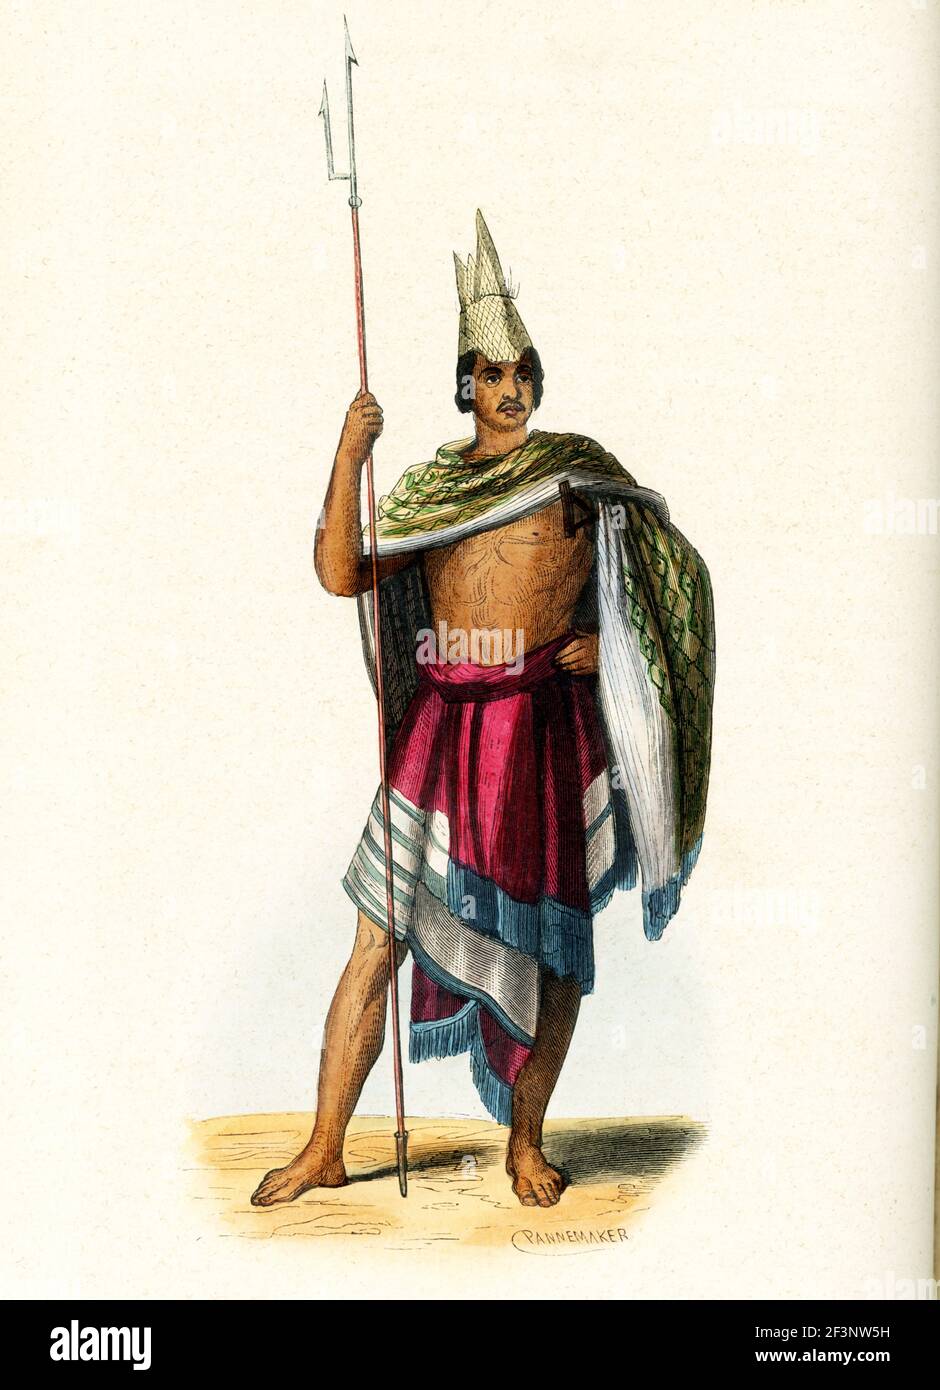 This 1840s illustration shows a native of the island of Rote in Indonesia. Rote Island is an island of Indonesia, part of the East Nusa Tenggara province of the Lesser Sunda Islands. Rote Island is part of the area of the world known as Oceania. Oceania is a geographic region that includes Australasia, Melanesia, Micronesia and Polynesia. Spanning the Eastern and Western Hemispheres, Oceania has a land area of 8,525,989 square kilometers. Stock Photo